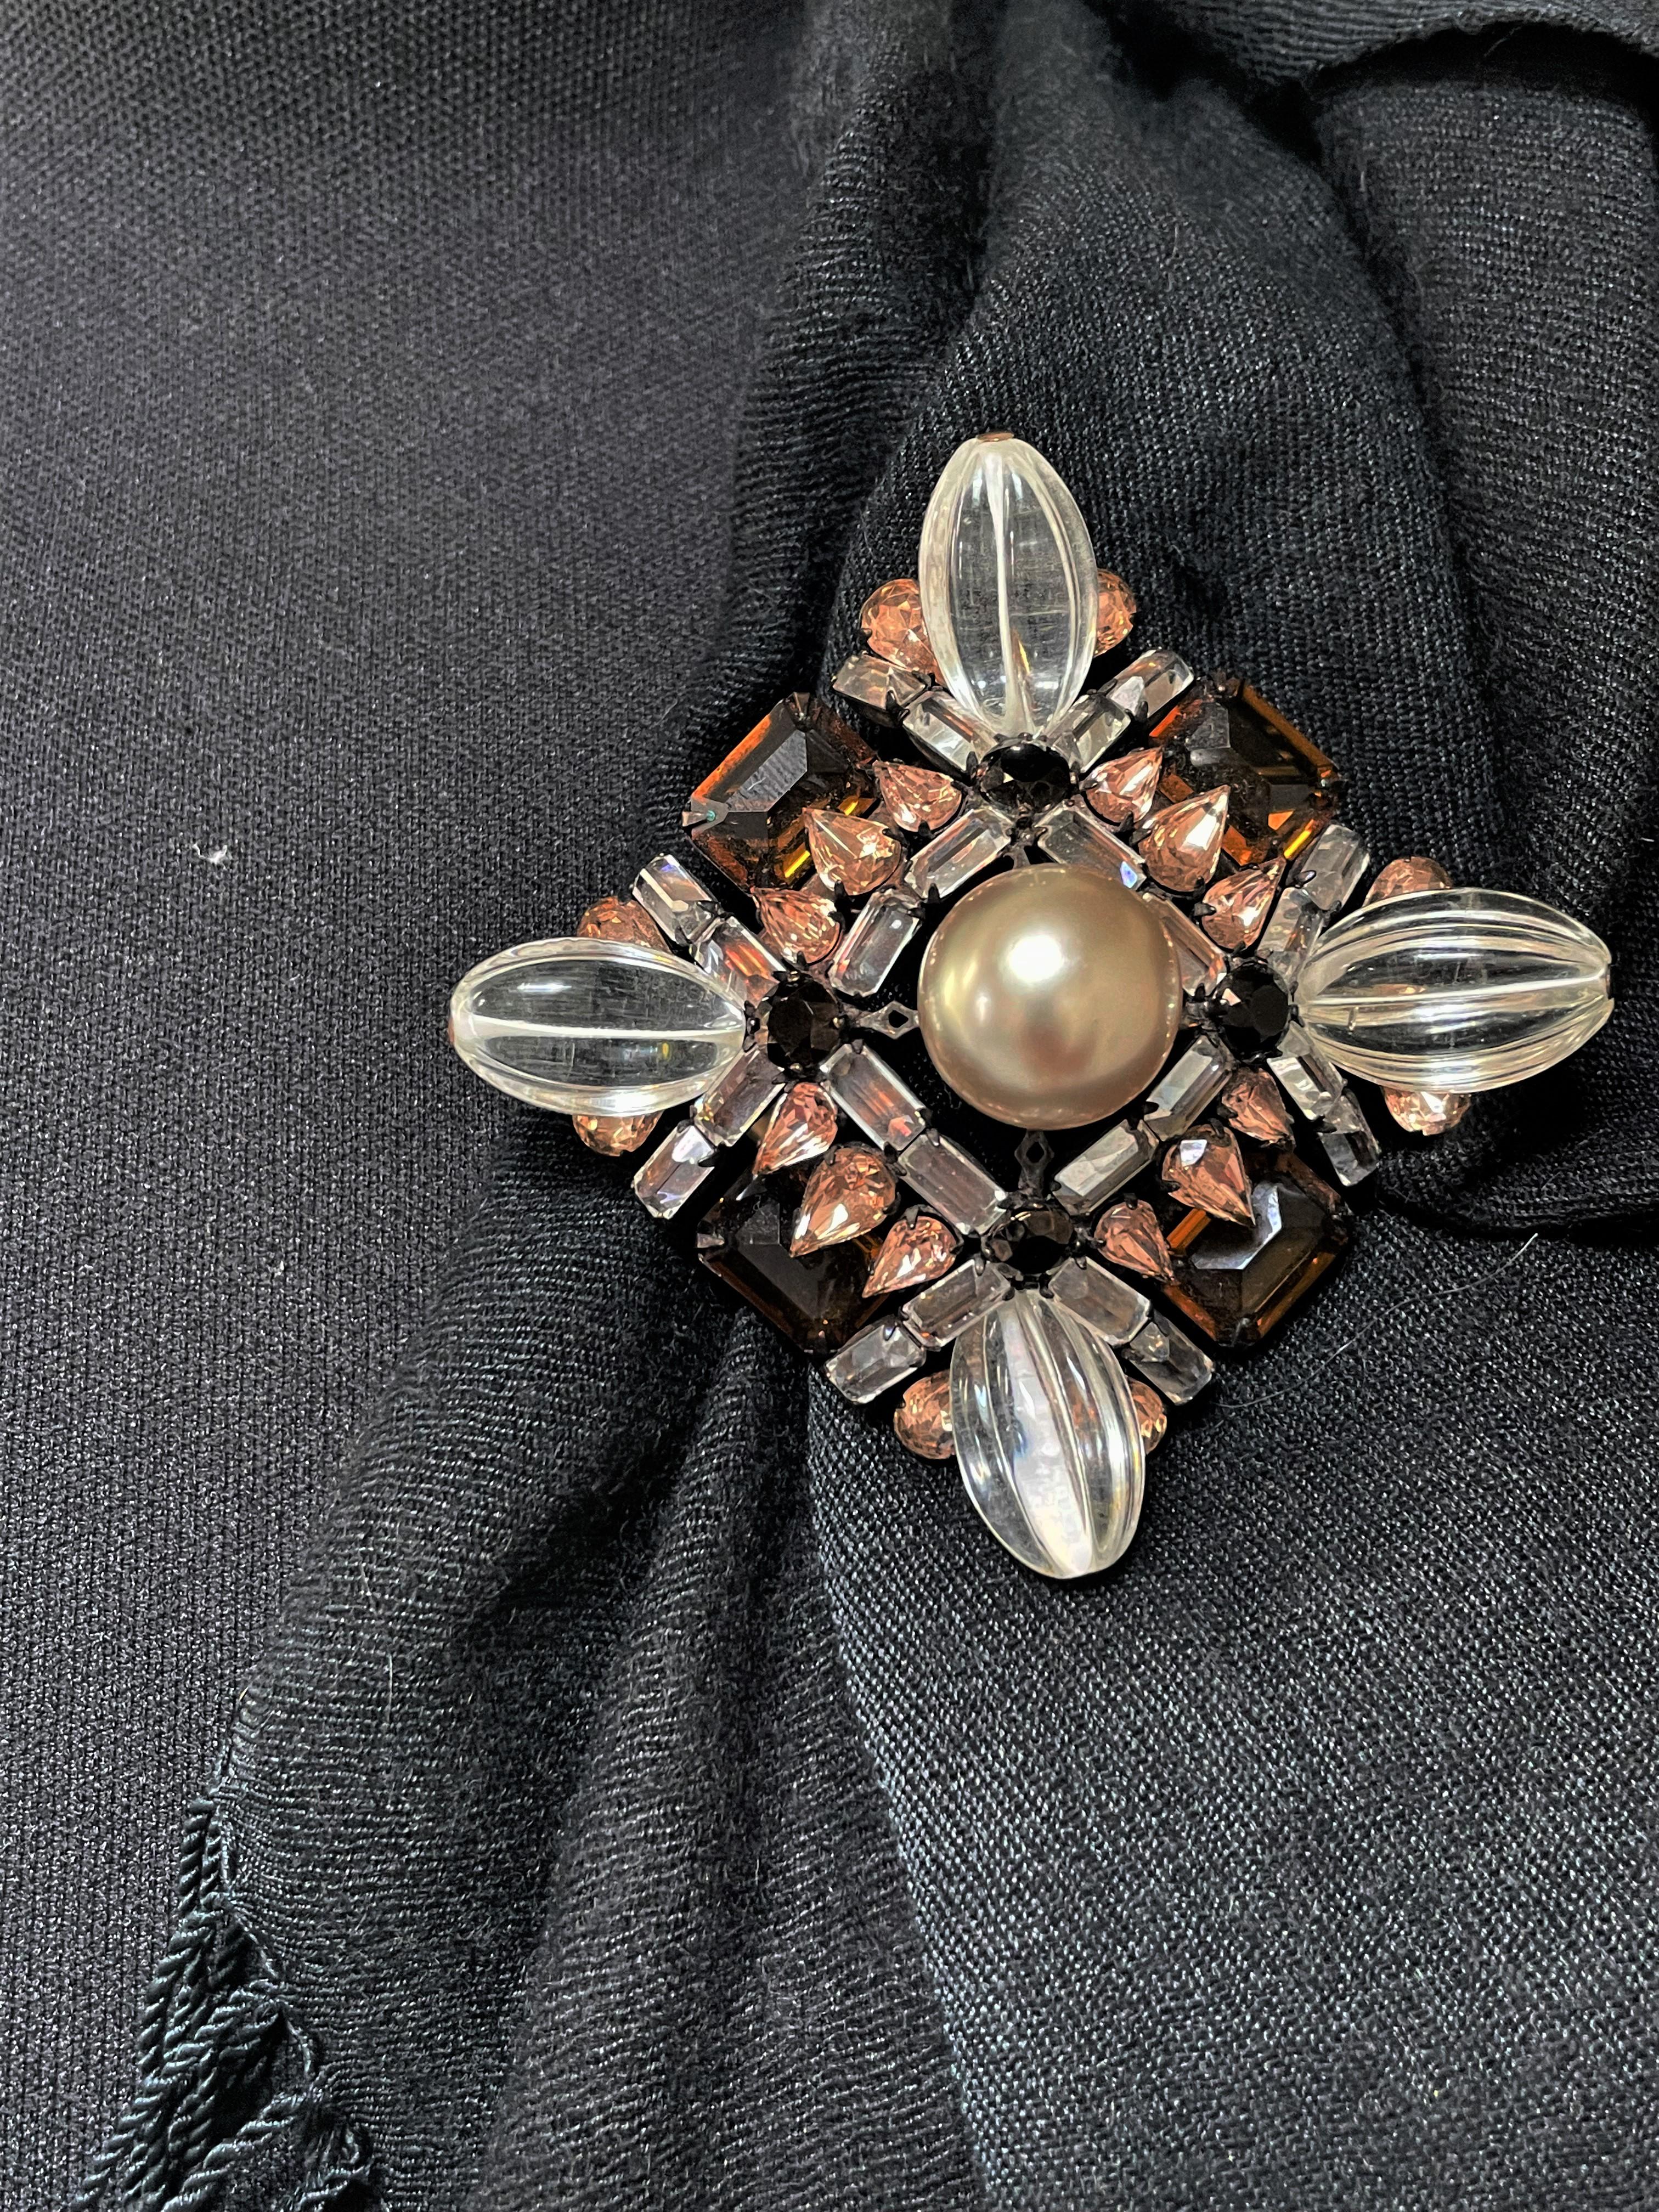 Mixed Cut Brooch by H. Schreiner NY from the 1950s, Topaz colored cut rhinestones   For Sale